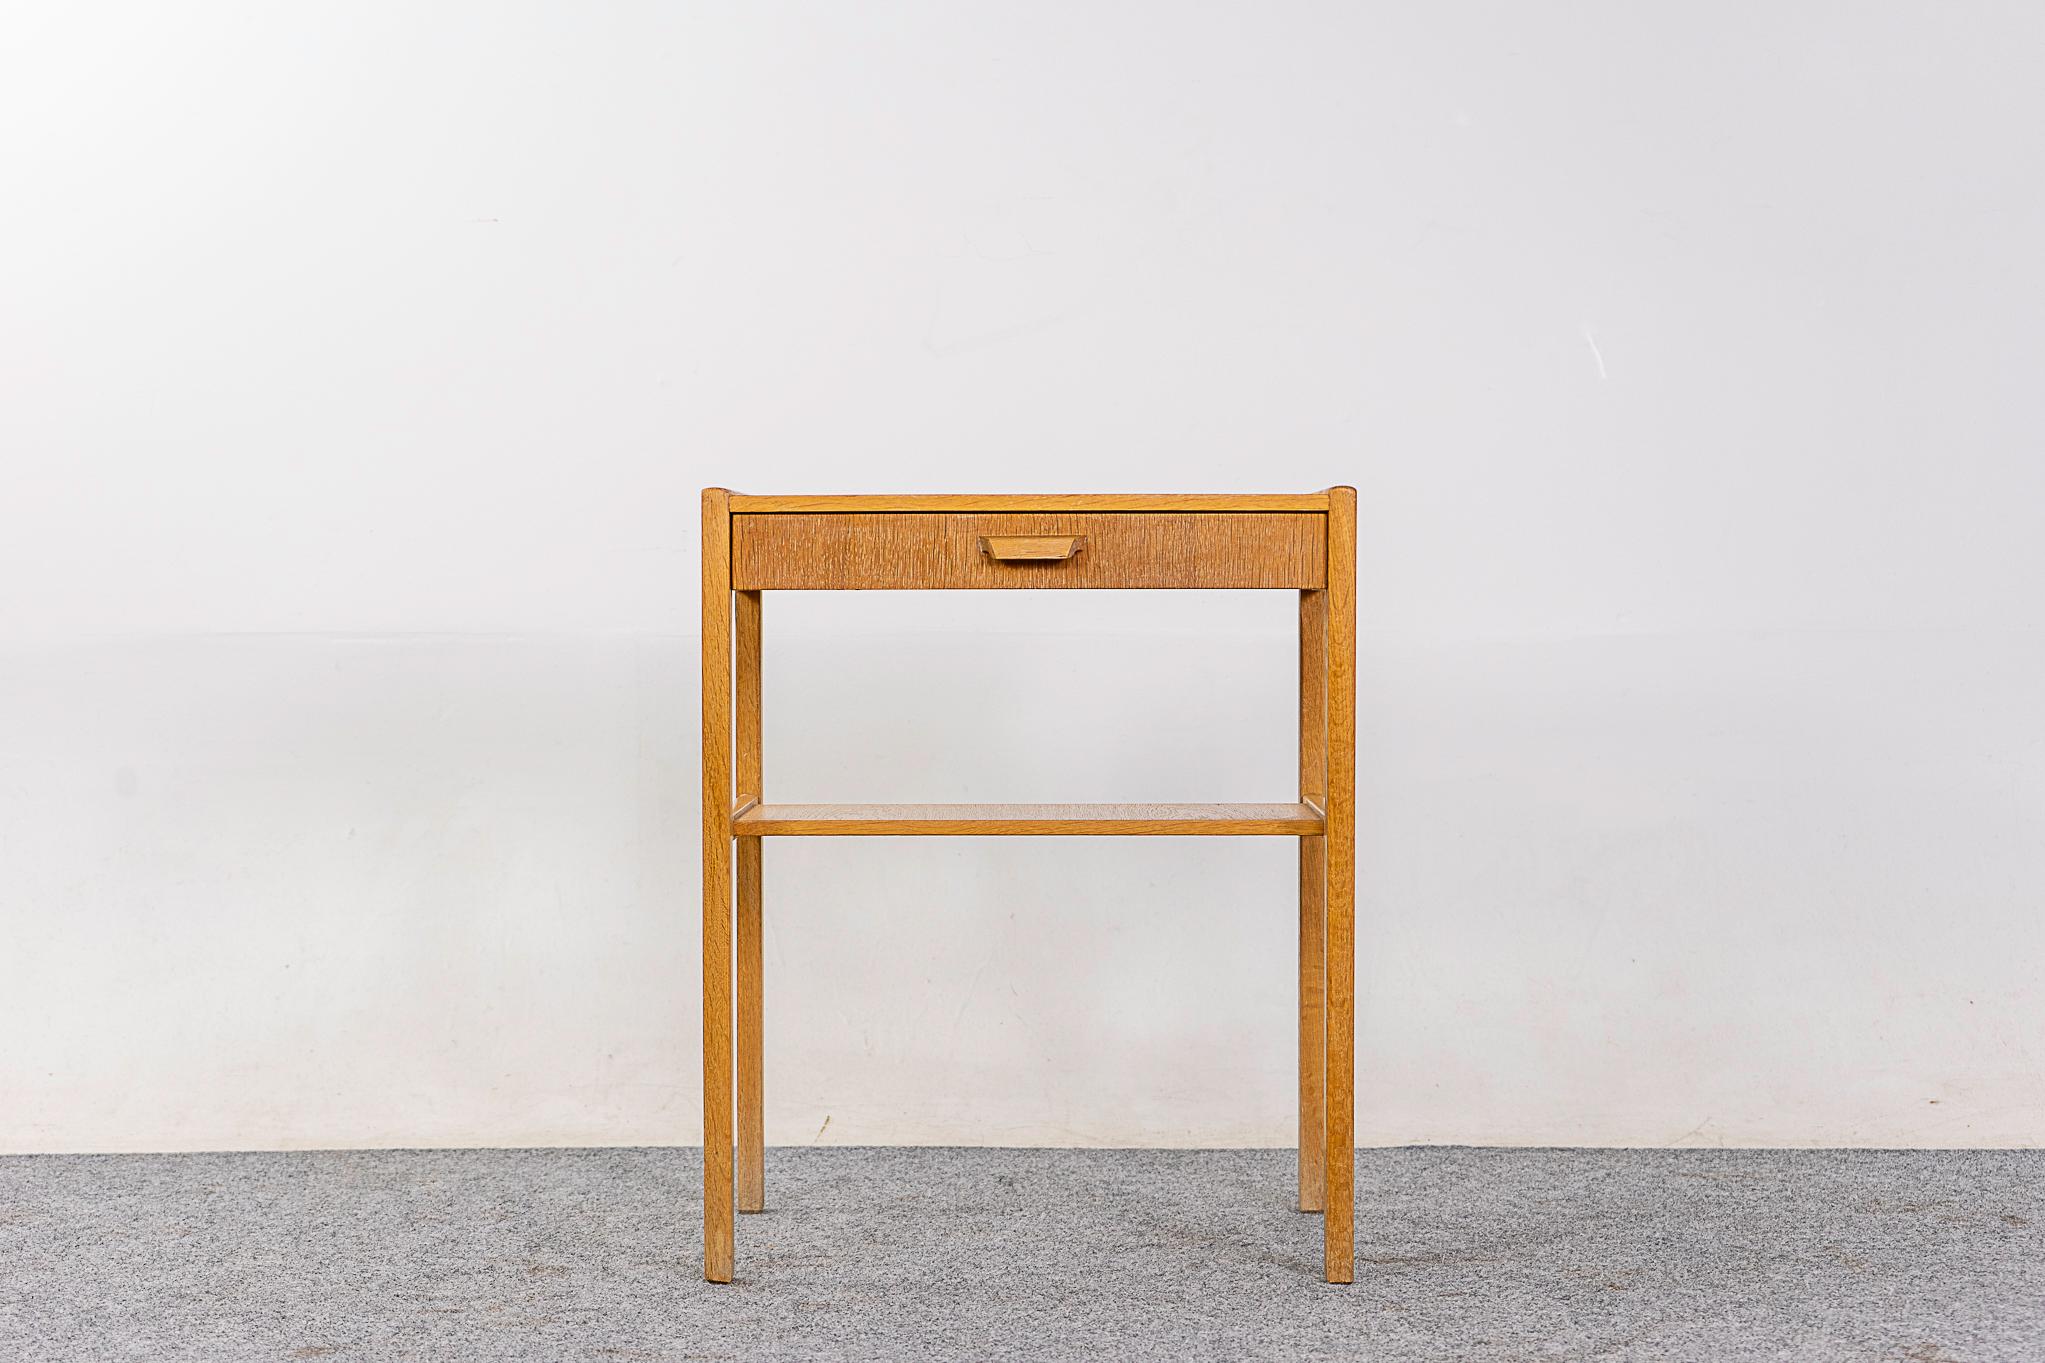 Oak Danish bedside table, circa 1960s. Beautifully veneered case rests on slender, tapered, legs. Dovetailed drawer for storage of small items, open cubby is perfect for your favorite book! 

Unrestored item, some marks consistent with age.